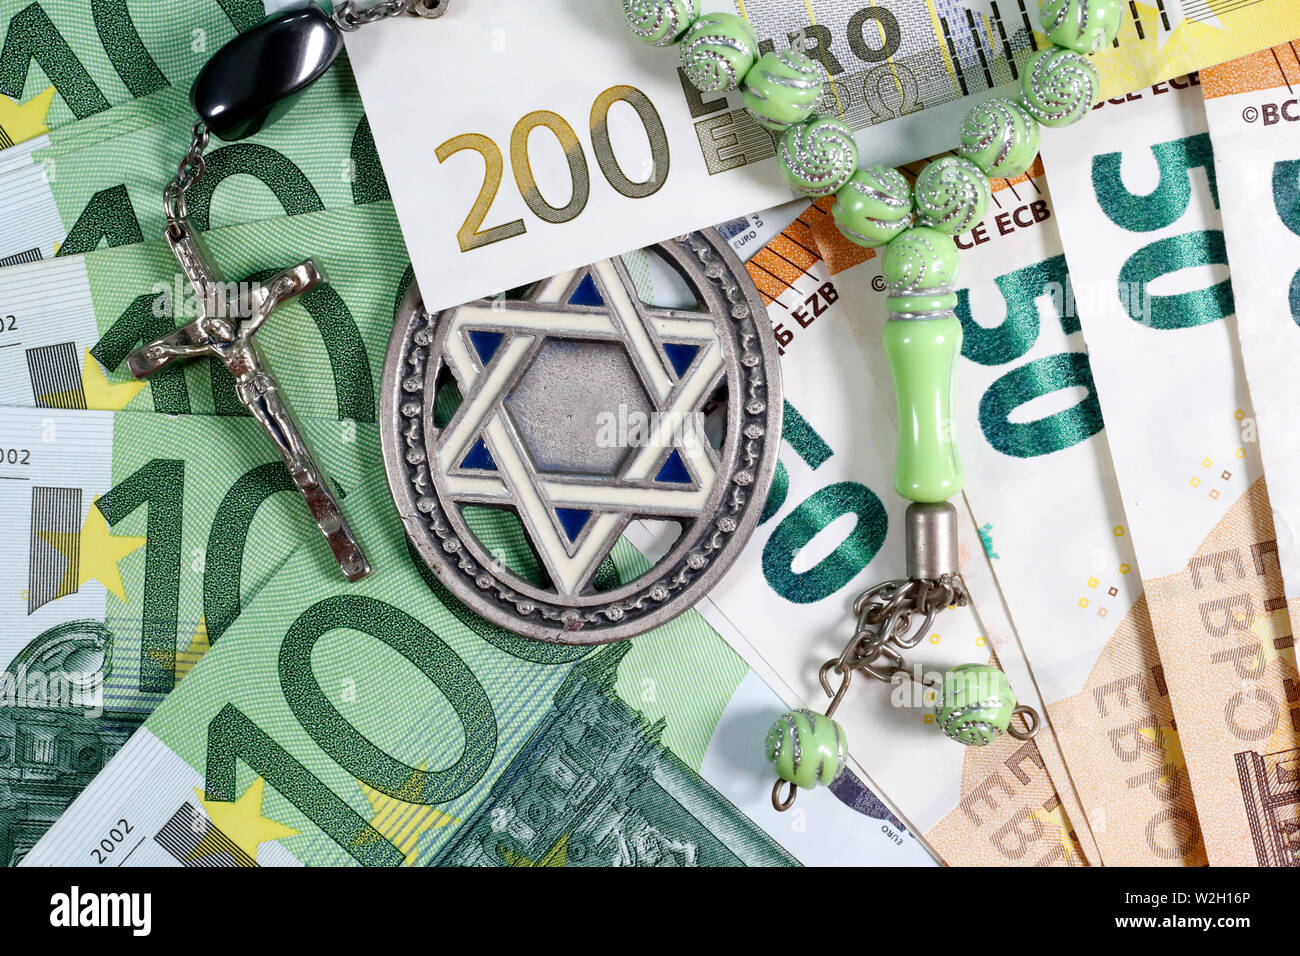 Banknotes of euro currency.  Christianity, Islamic and Judaism finance and economy concept with Jewish Star, Prayer Beads and Crucifix. Interreligious Stock Photo